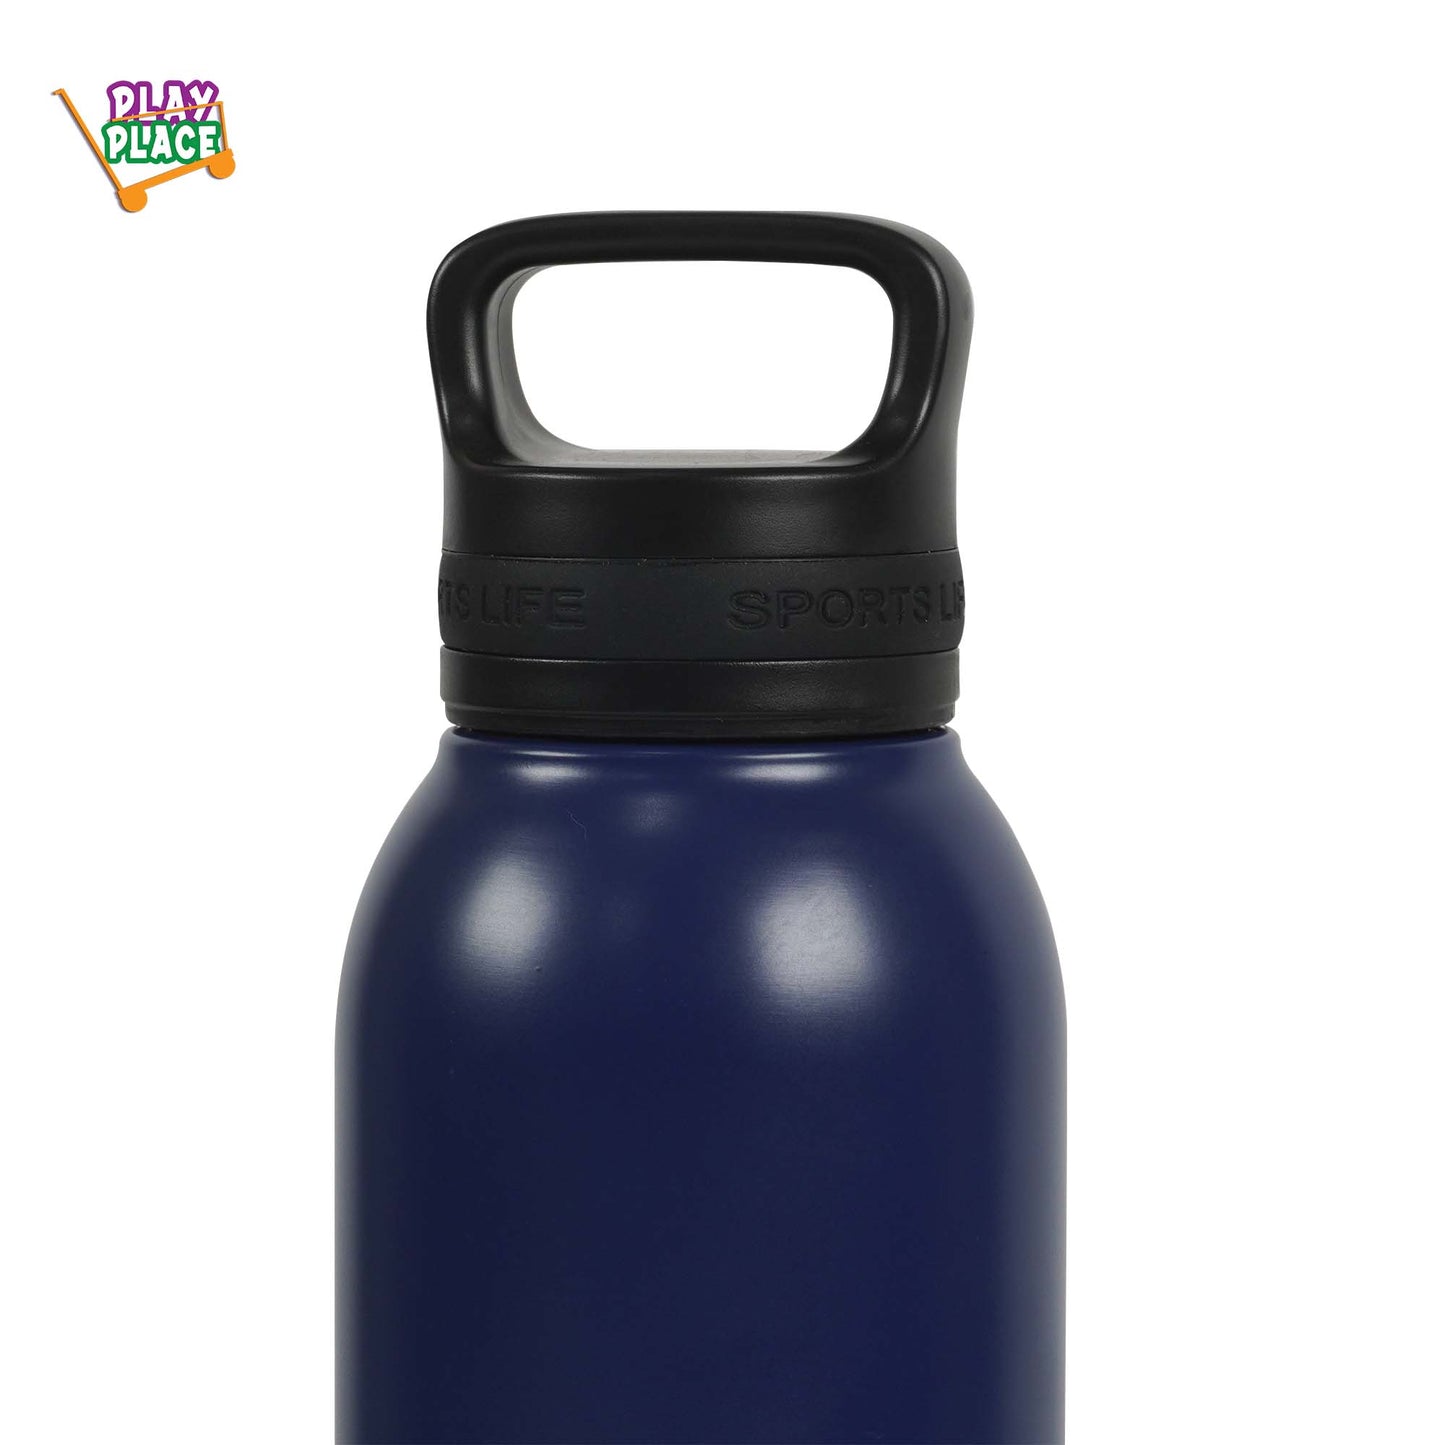 Homeatic Leasure and sports Insulated Bottle - 730ml (Dark Blue)